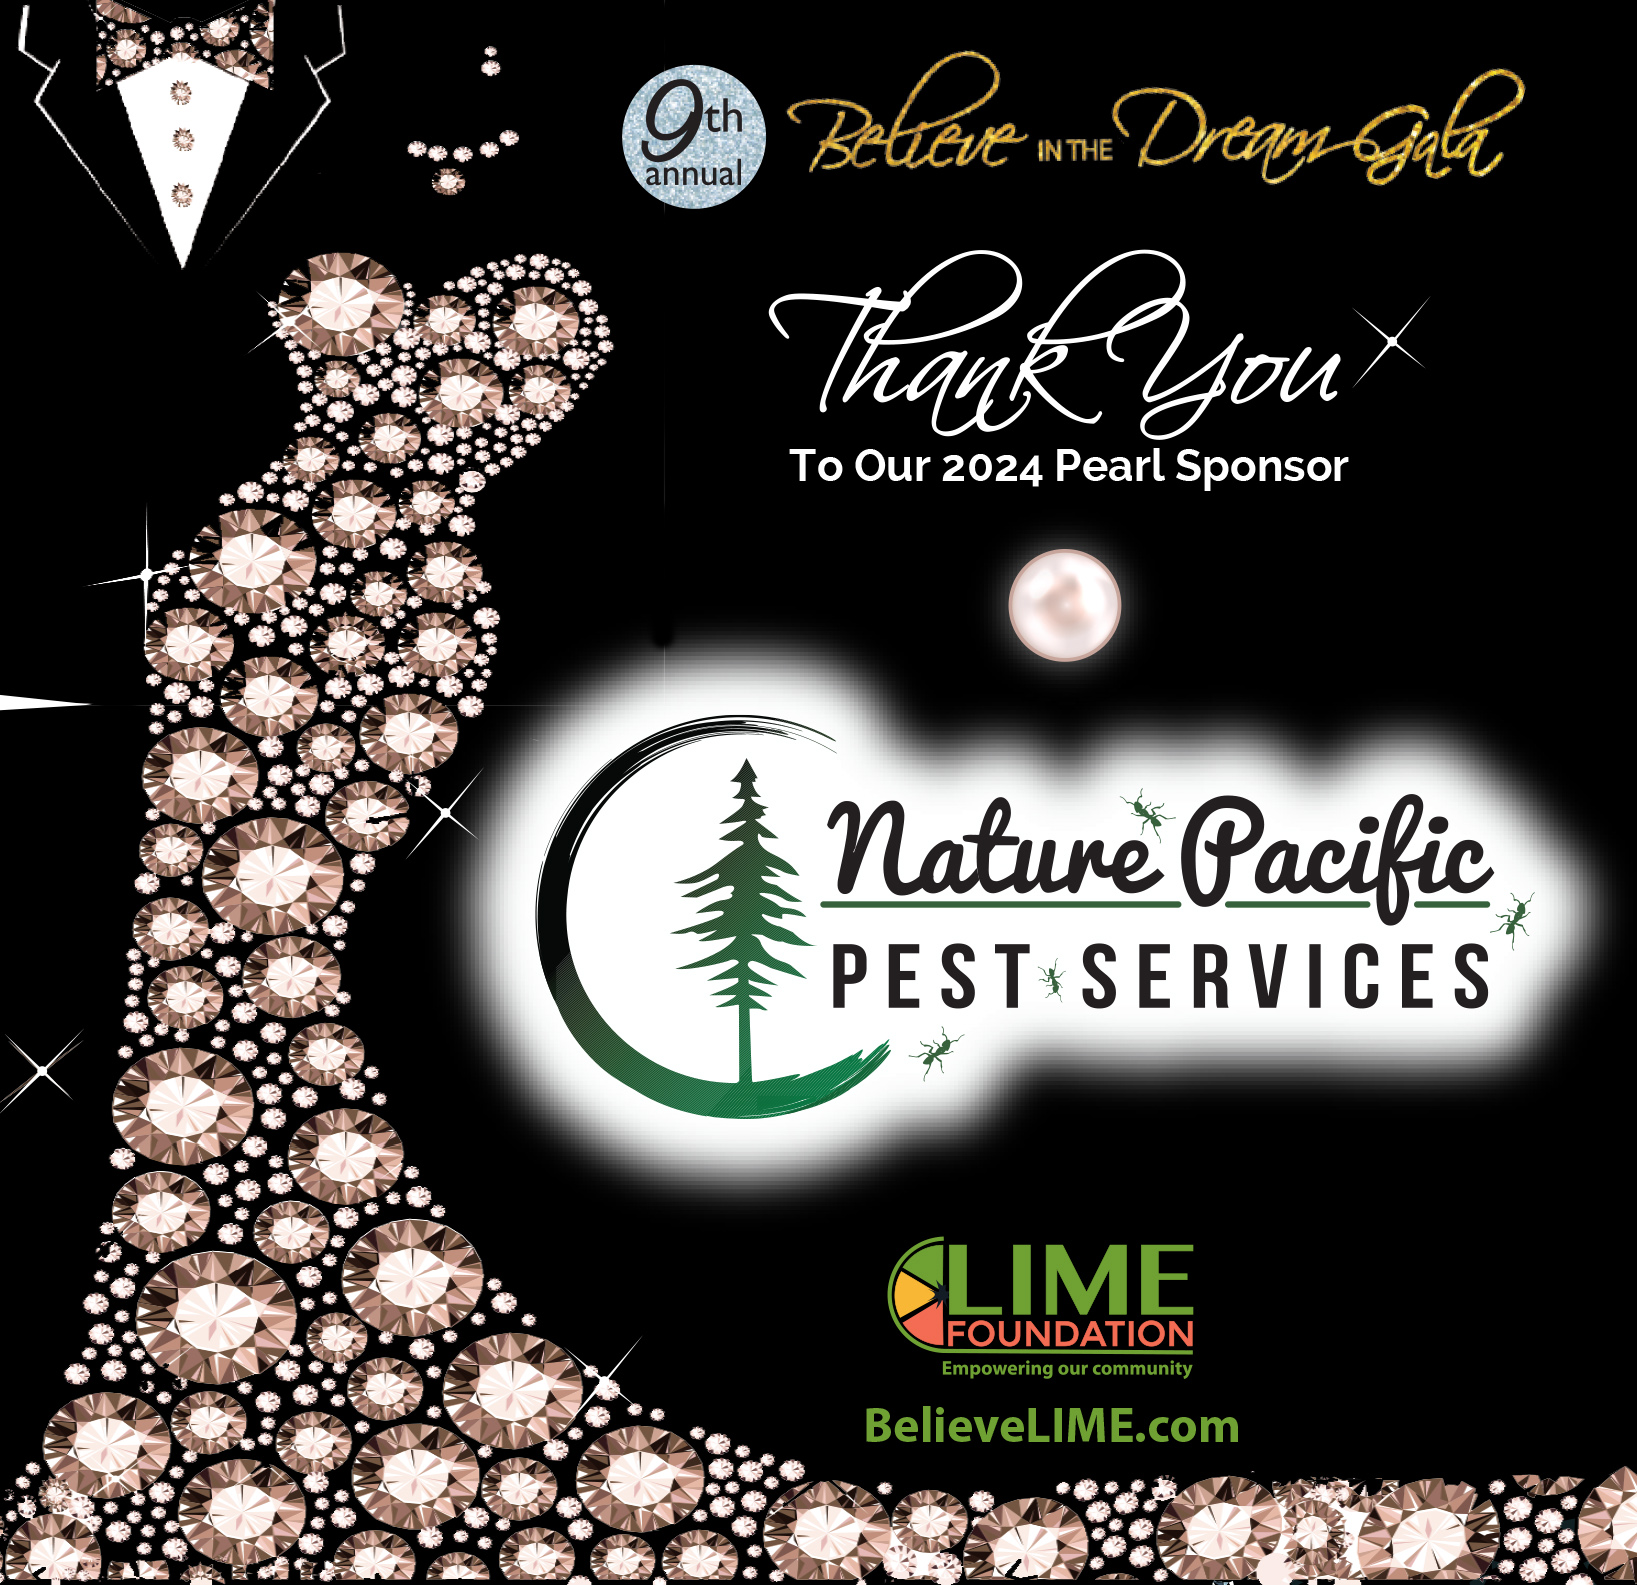 Graphic for "Believe The Dream 2024 gala" featuring a floral design pathway leading to a tree, thanking the 2024 pearl sponsor, Nature Pacific Pest Services.